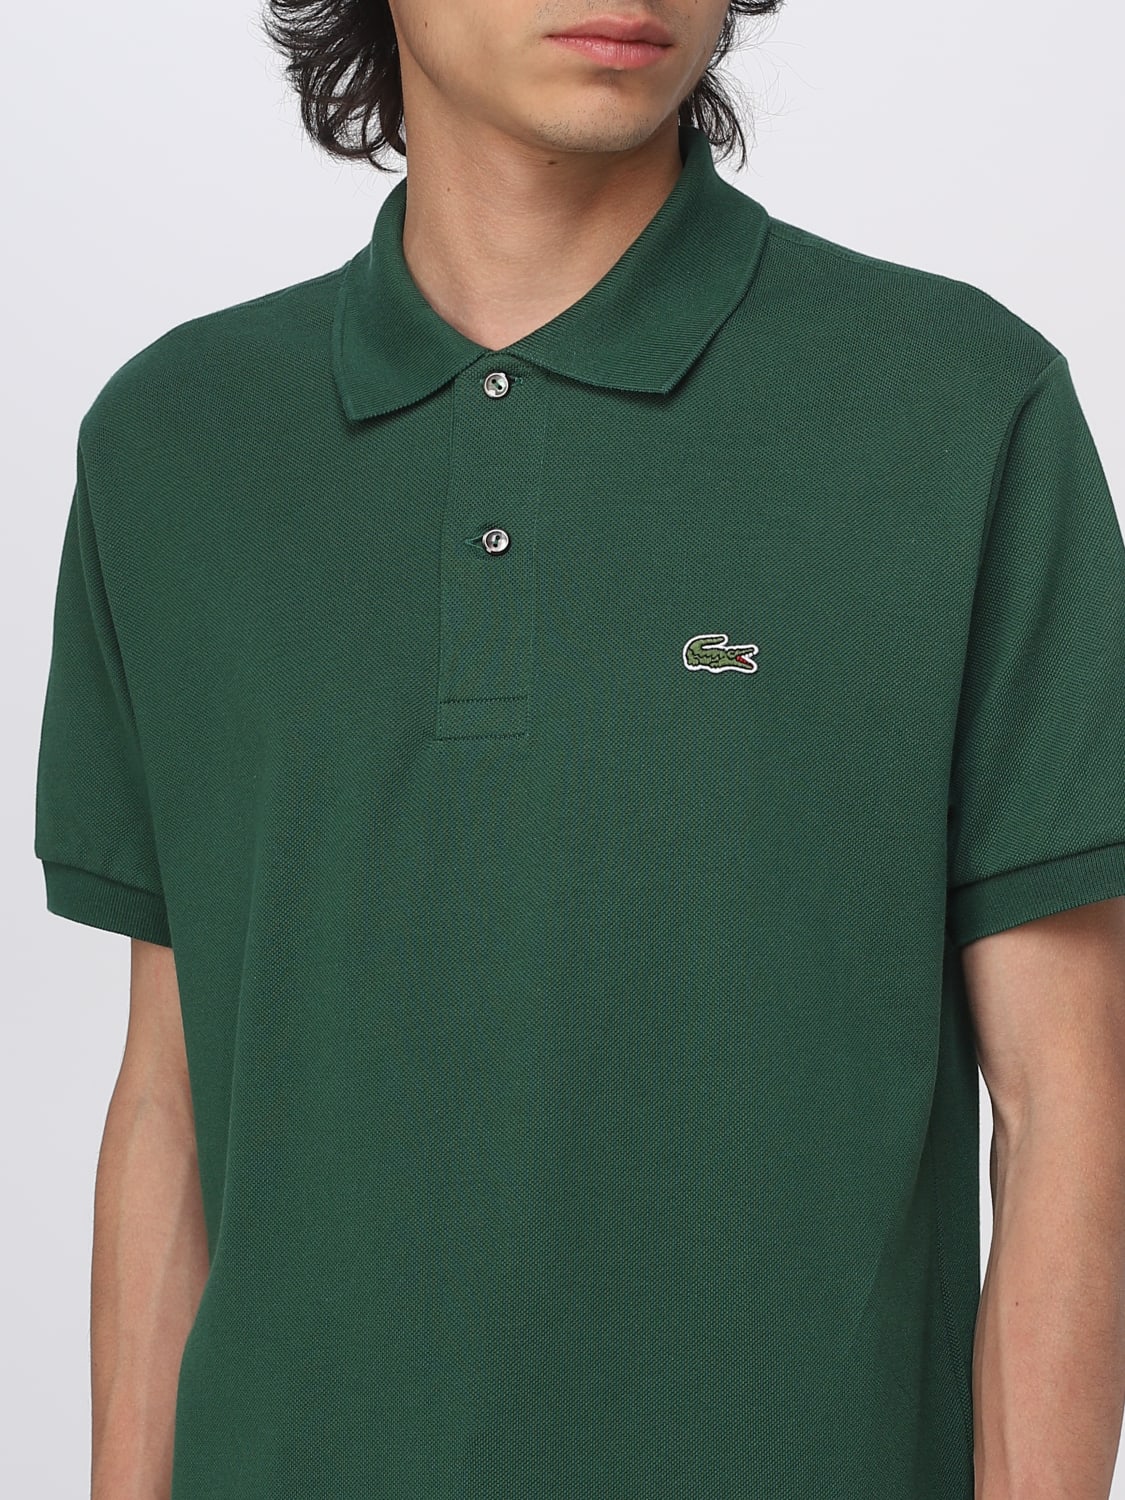 LACOSTE: polo shirt for man - Green | shirt L1212 online at GIGLIO.COM